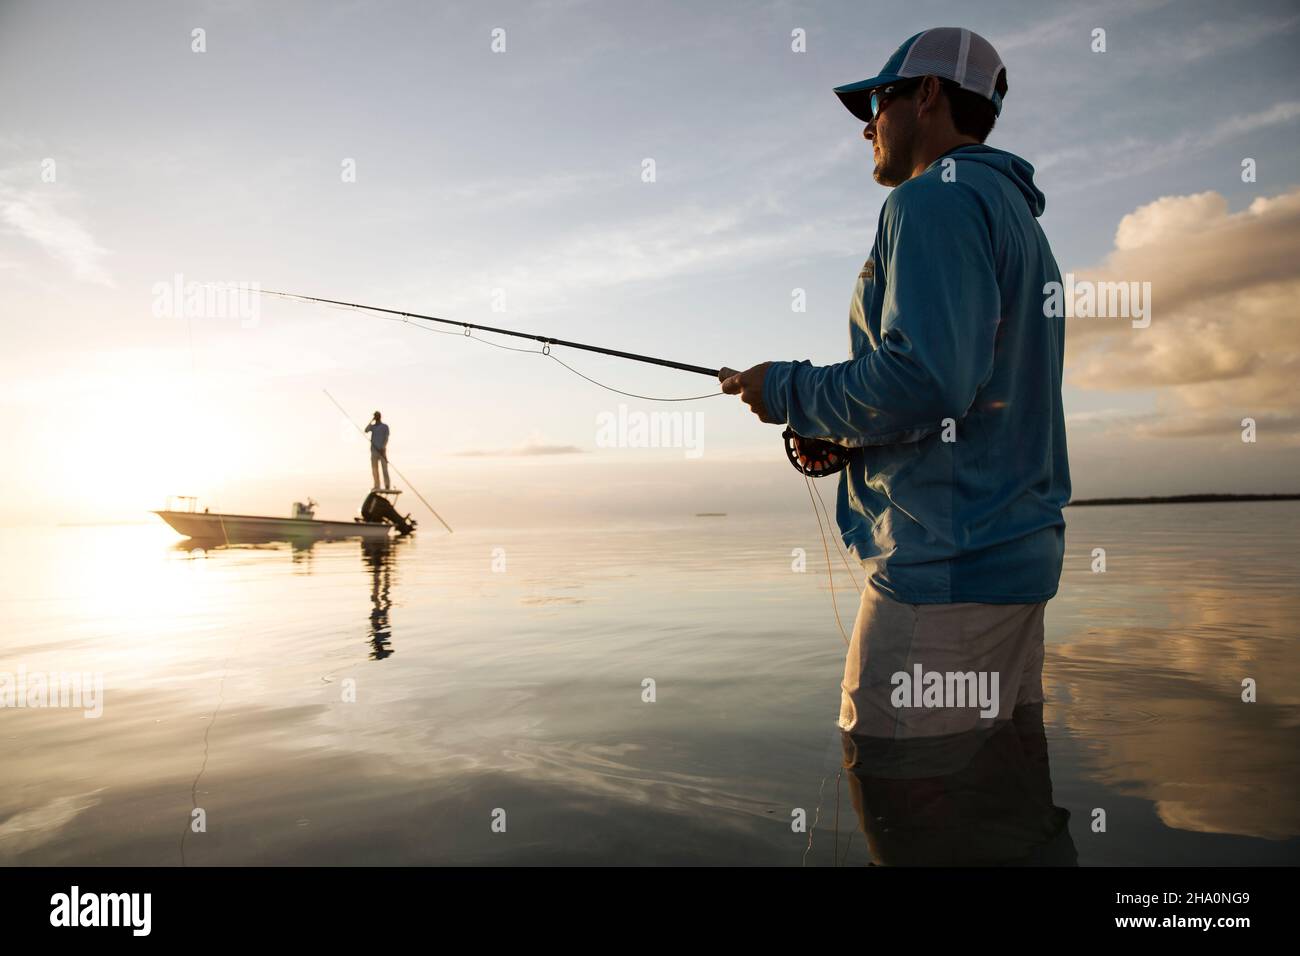 A fisherman wades while fly fishing in keys with boat in background Stock Photo